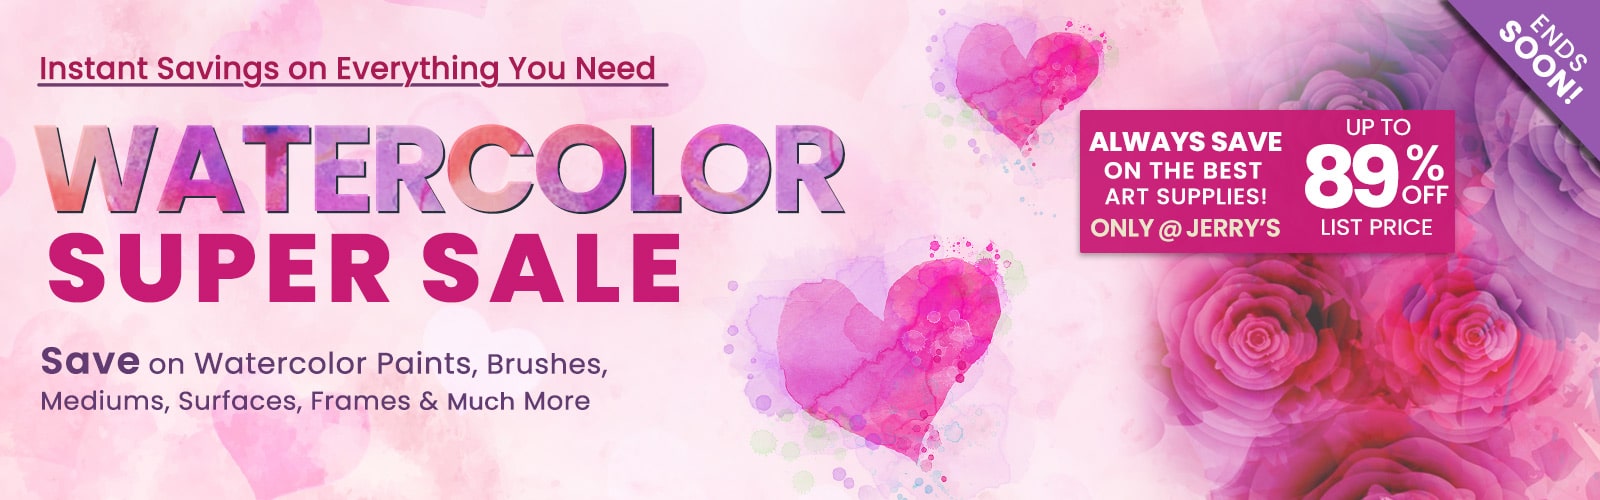 Everything Watercolor Super Sale